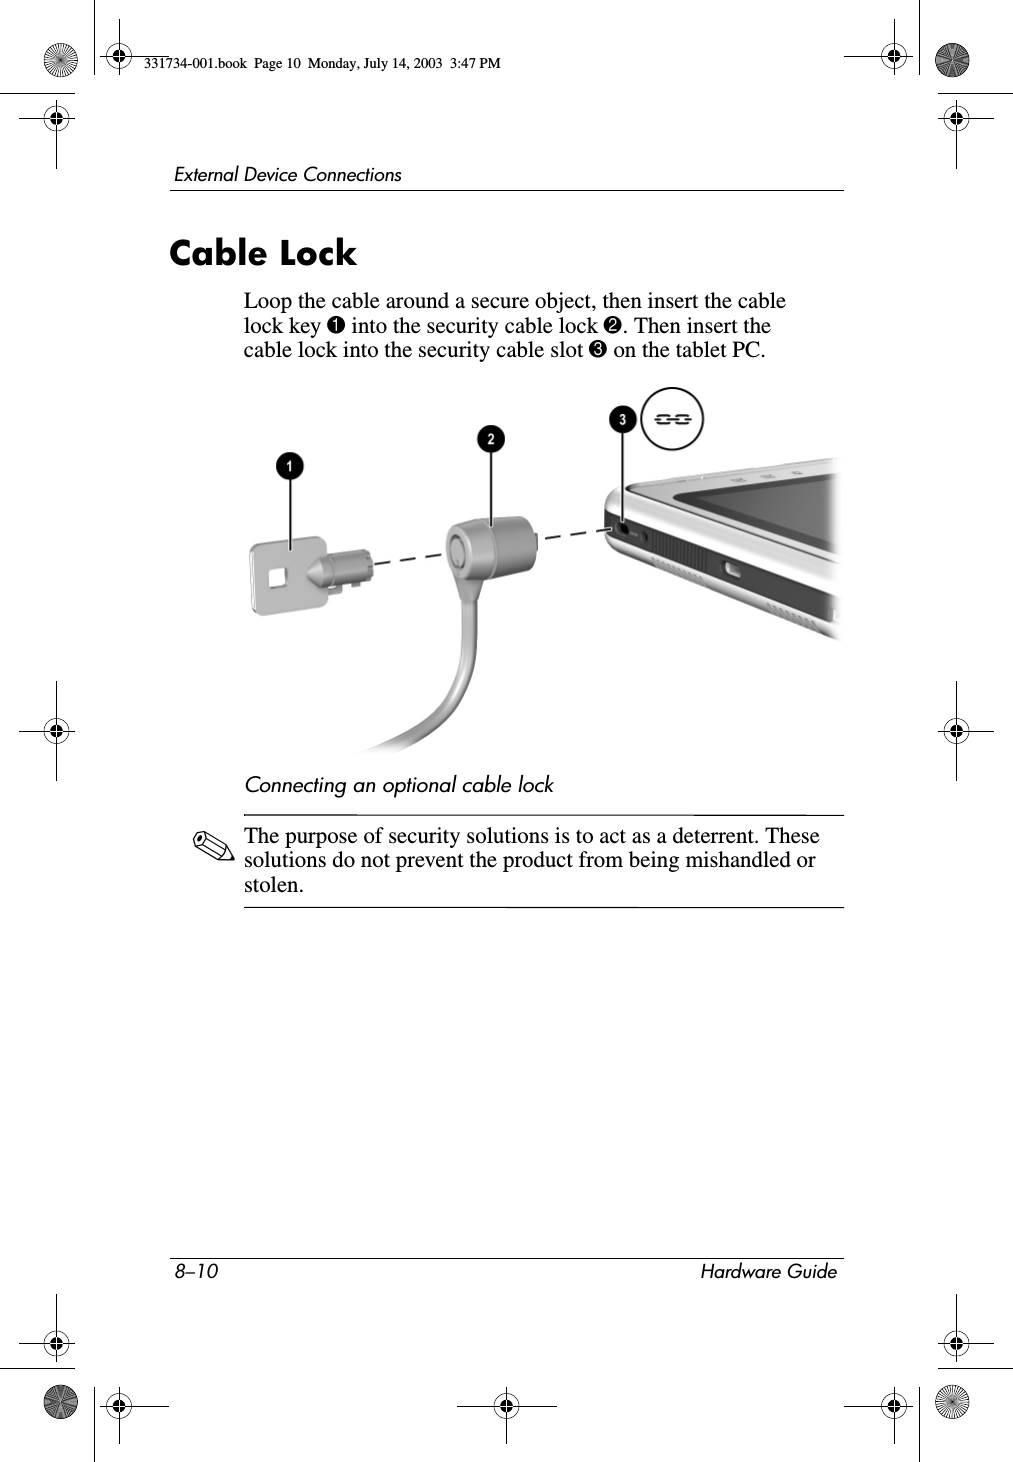 8–10 Hardware GuideExternal Device ConnectionsCable LockLoop the cable around a secure object, then insert the cable lock key 1 into the security cable lock 2. Then insert the cable lock into the security cable slot 3 on the tablet PC.Connecting an optional cable lock✎The purpose of security solutions is to act as a deterrent. These solutions do not prevent the product from being mishandled or stolen.331734-001.book  Page 10  Monday, July 14, 2003  3:47 PM